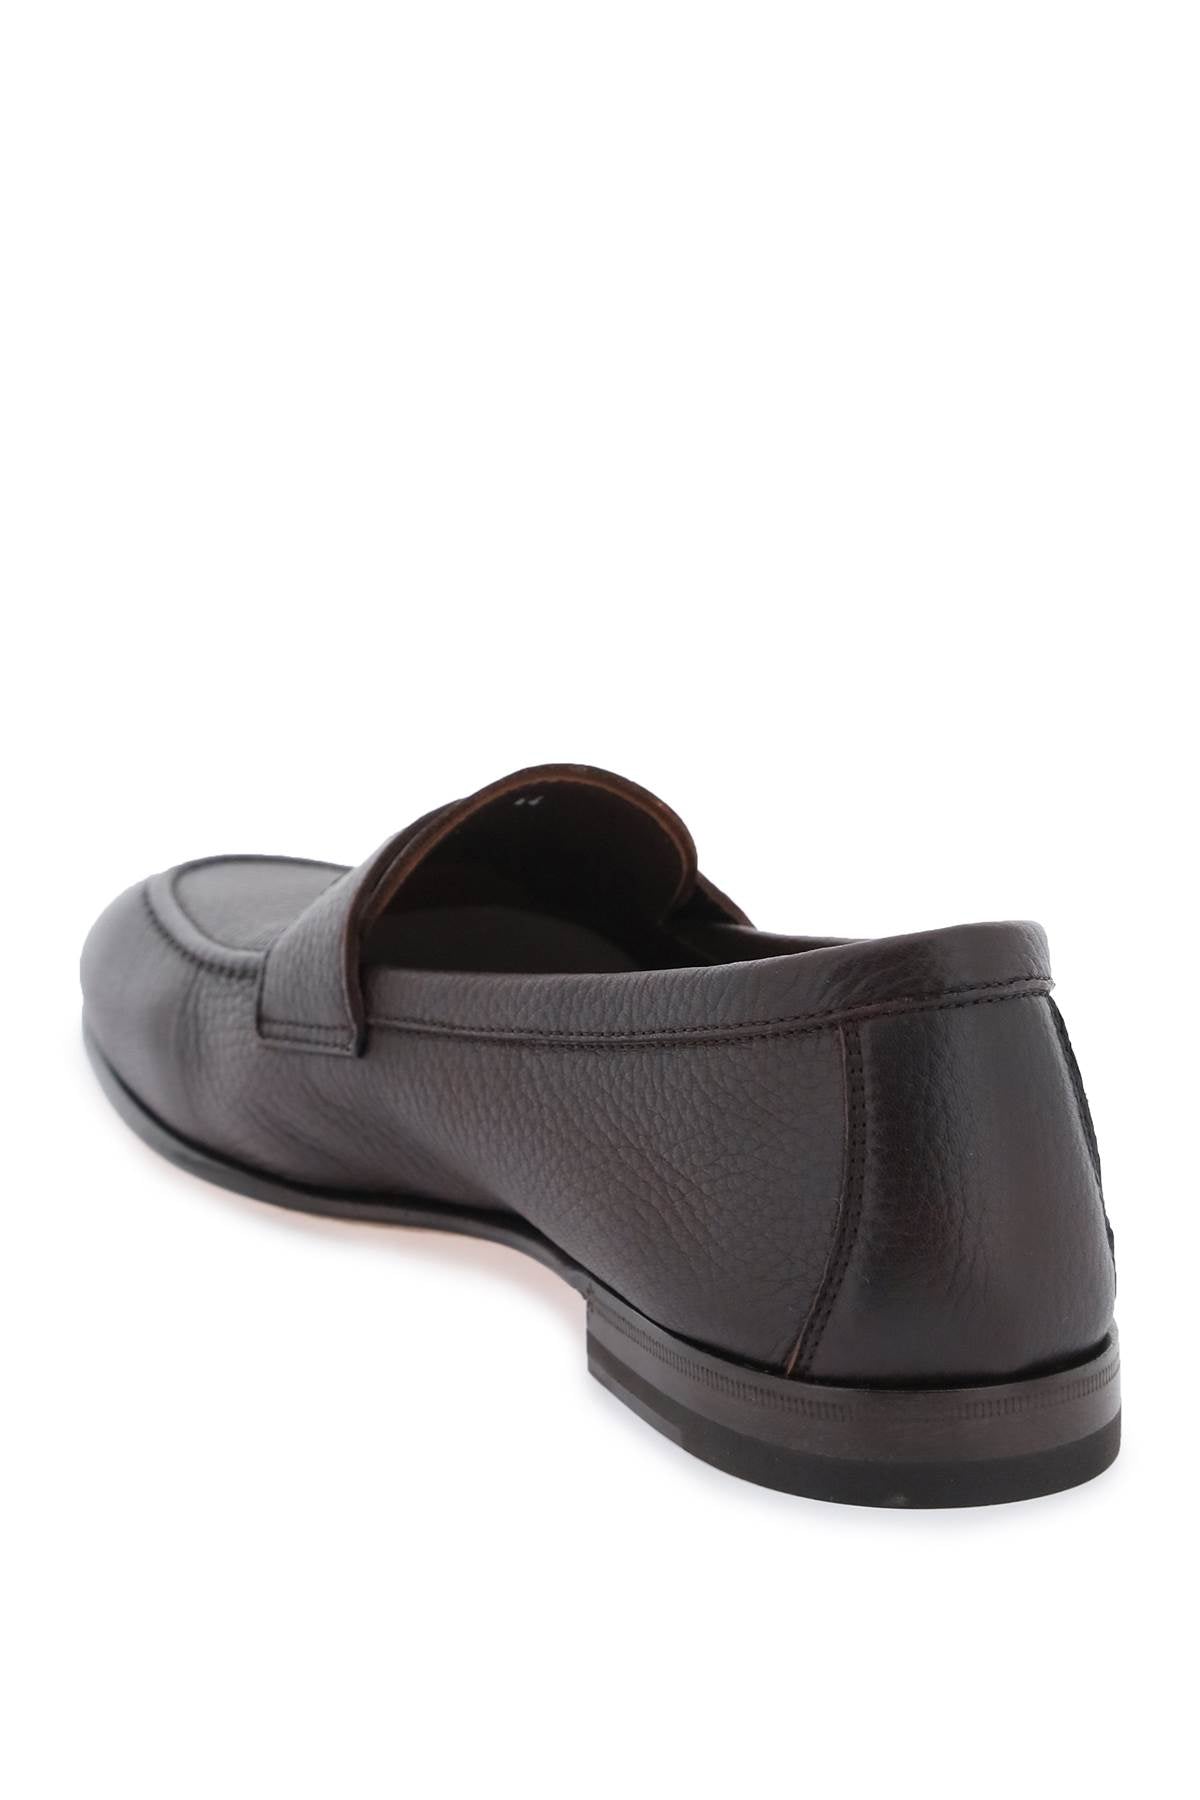 Henderson mocassins with strap-2